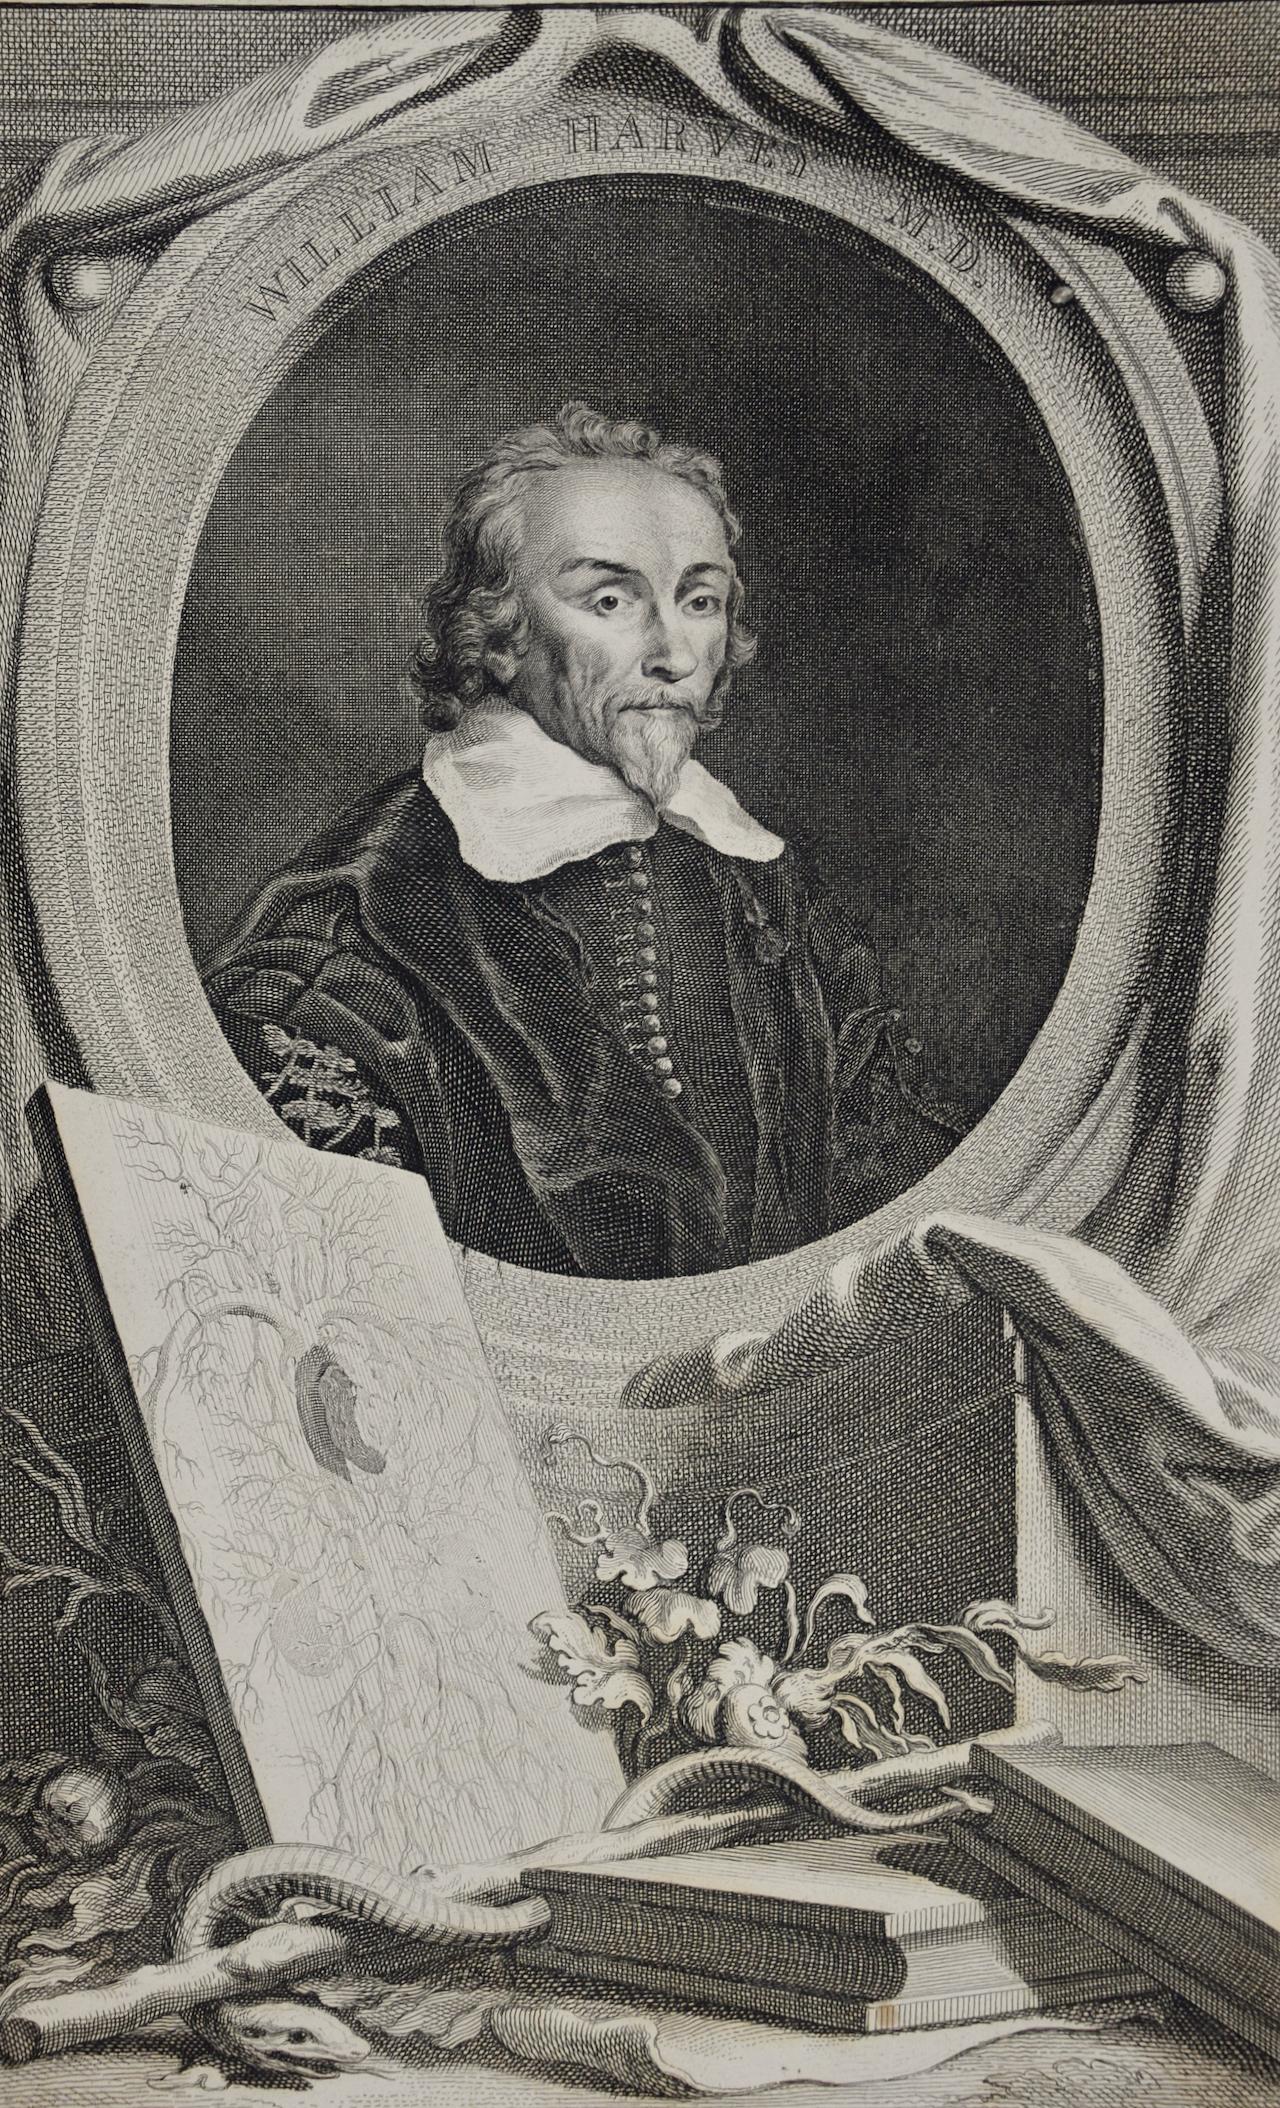 18th C. Portrait of William Harvey, MD: 17th C. Circulatory System Discoveries  - Print by Jacobus Houbraken